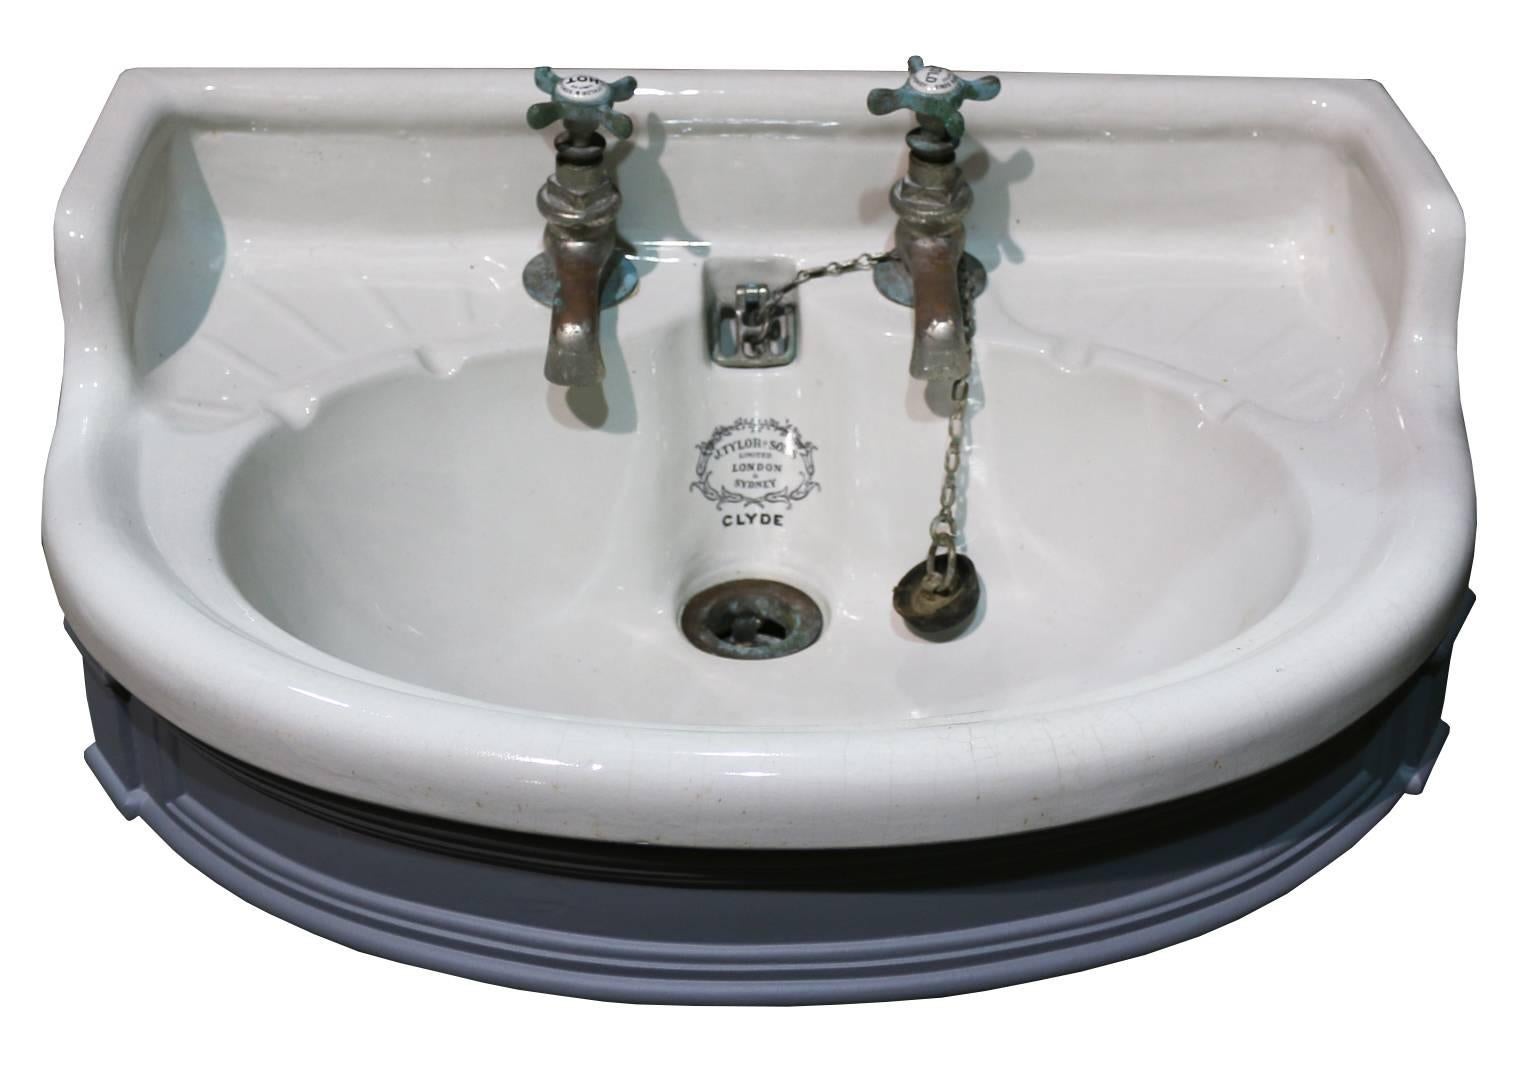 Edwardian ‘Clyde’ Basin Made by Tylor & Sons